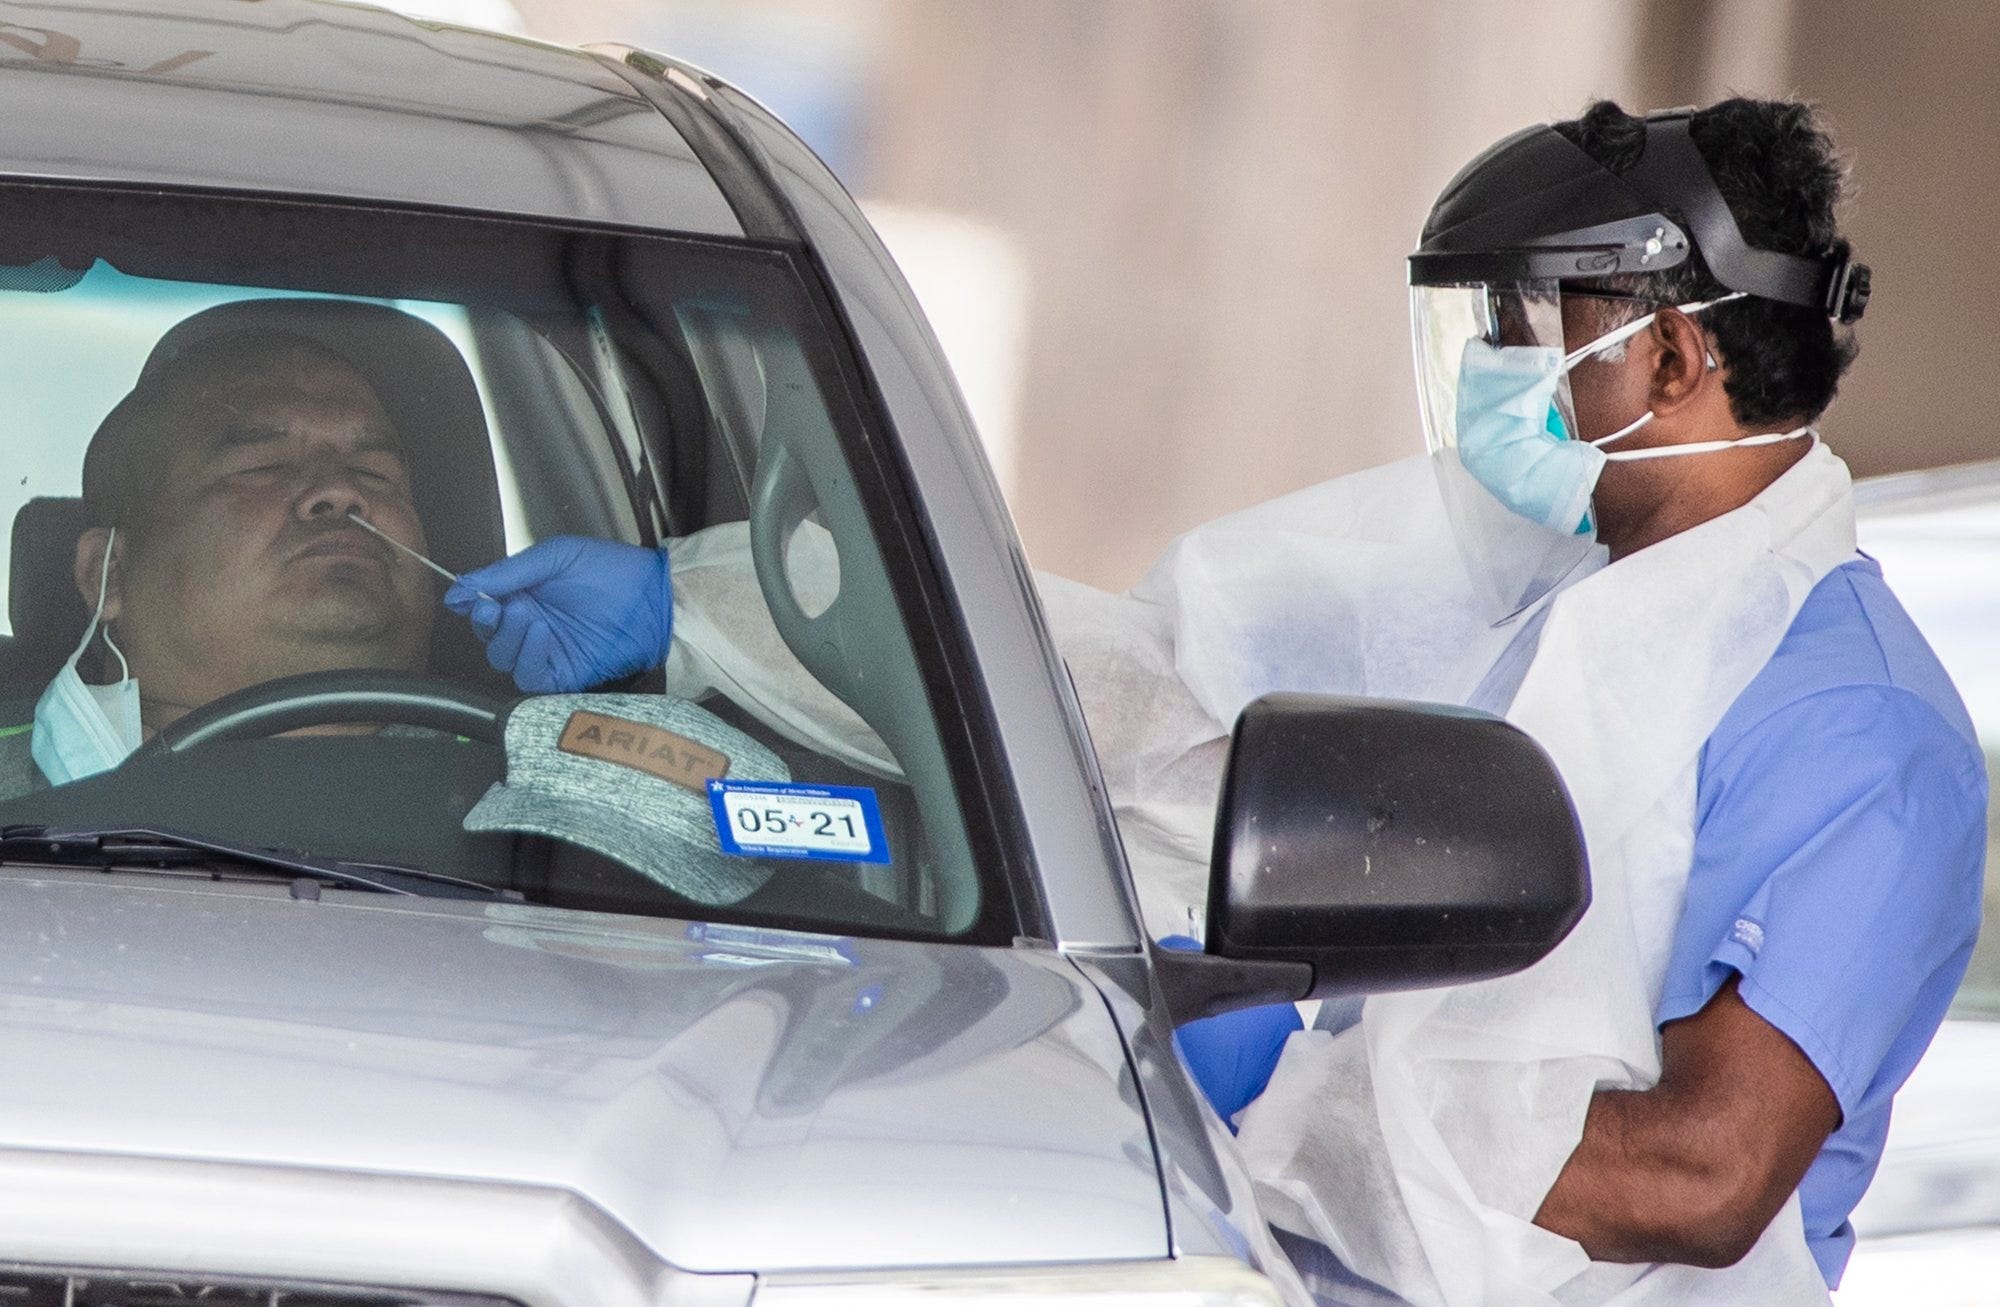 A man is tested for COVID-19 at a drive-through testing site at Community Care at the Hancock Center on Wednesday, June 29, 2020, during the coronavirus pandemic.